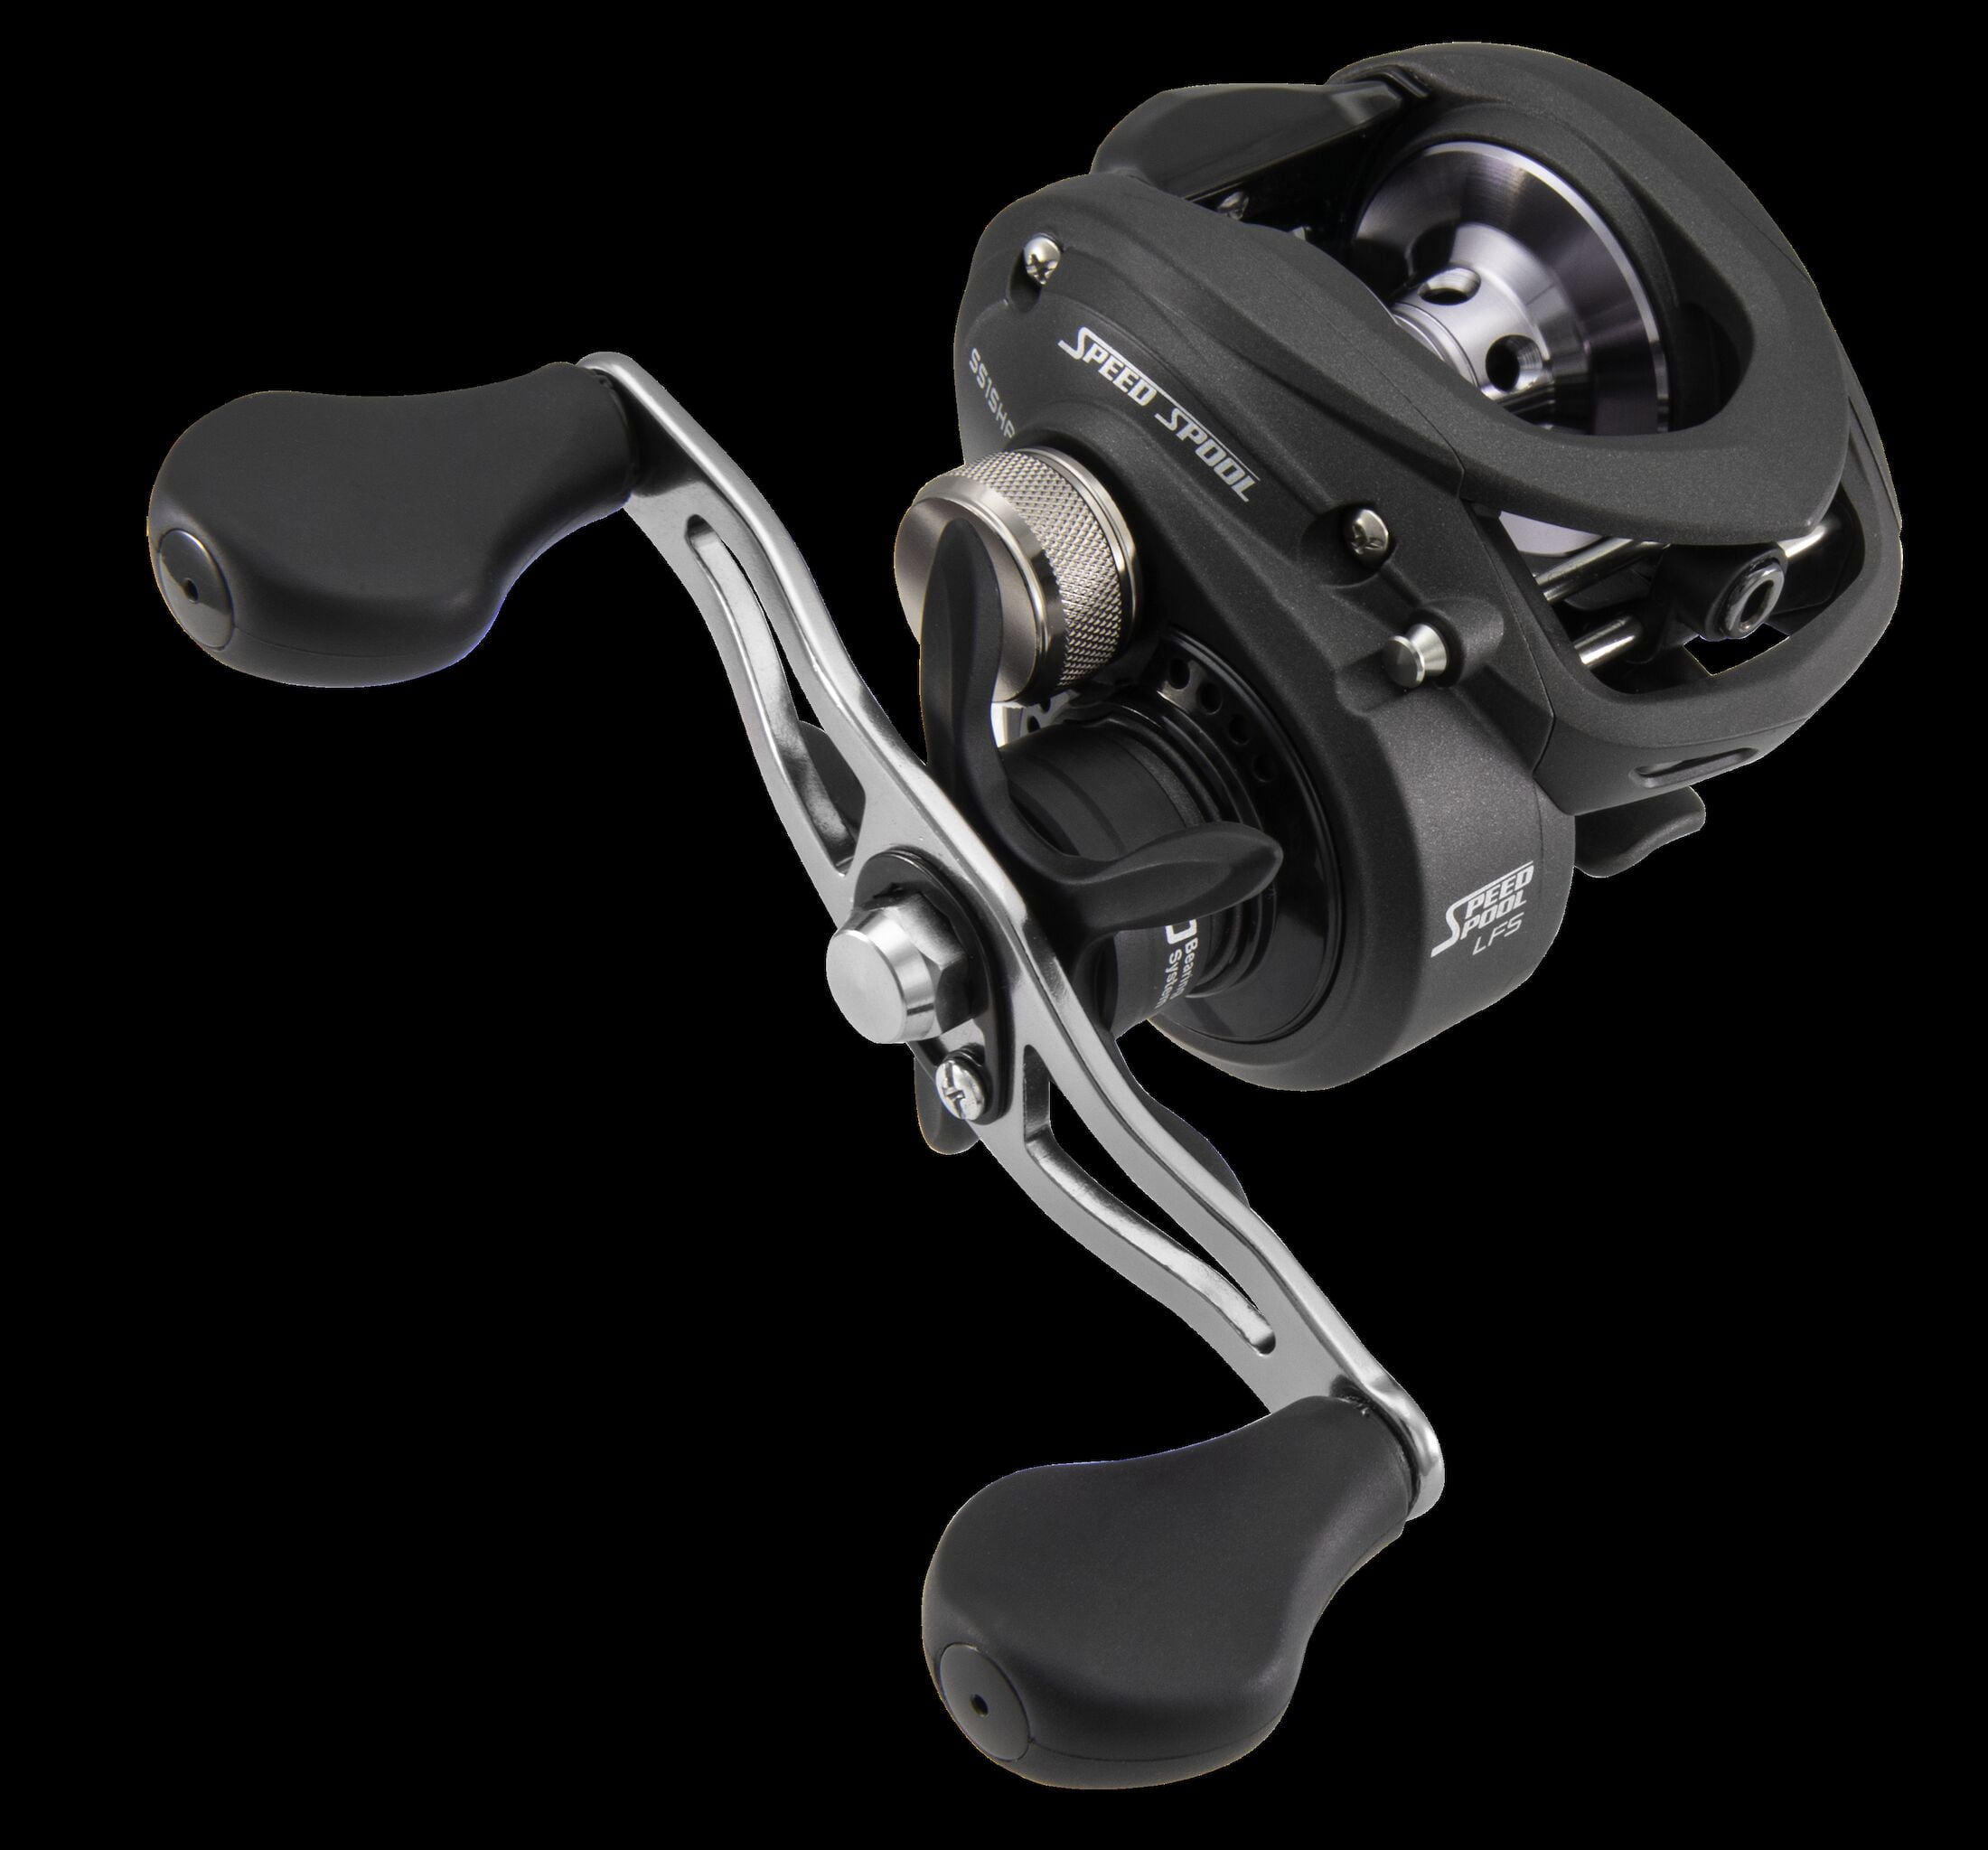 Lew's Speed Spool LFS Baitcast Fishing Reel, Right-Hand Retrieve, 7.5:1  Gear Ratio, 10 Bearing System with Stainless Steel Double Shielded Ball  Bearings, Black 